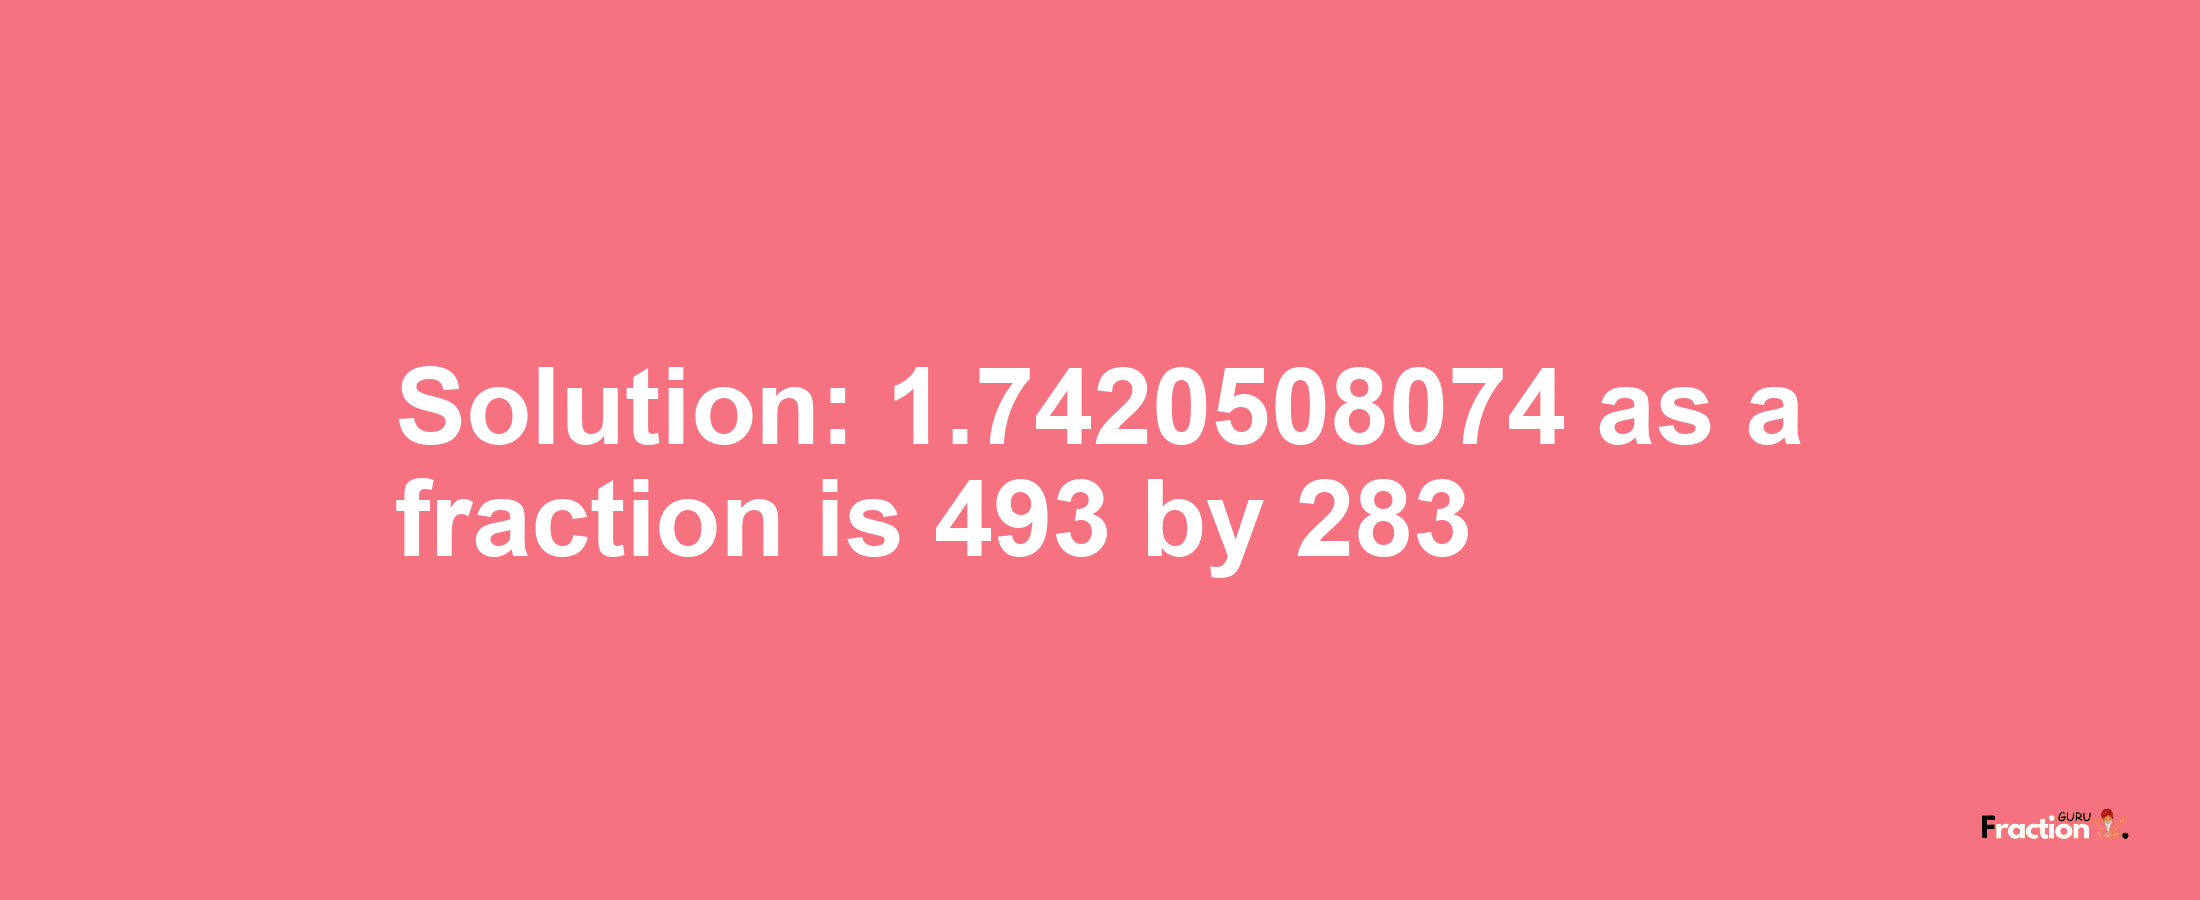 Solution:1.7420508074 as a fraction is 493/283